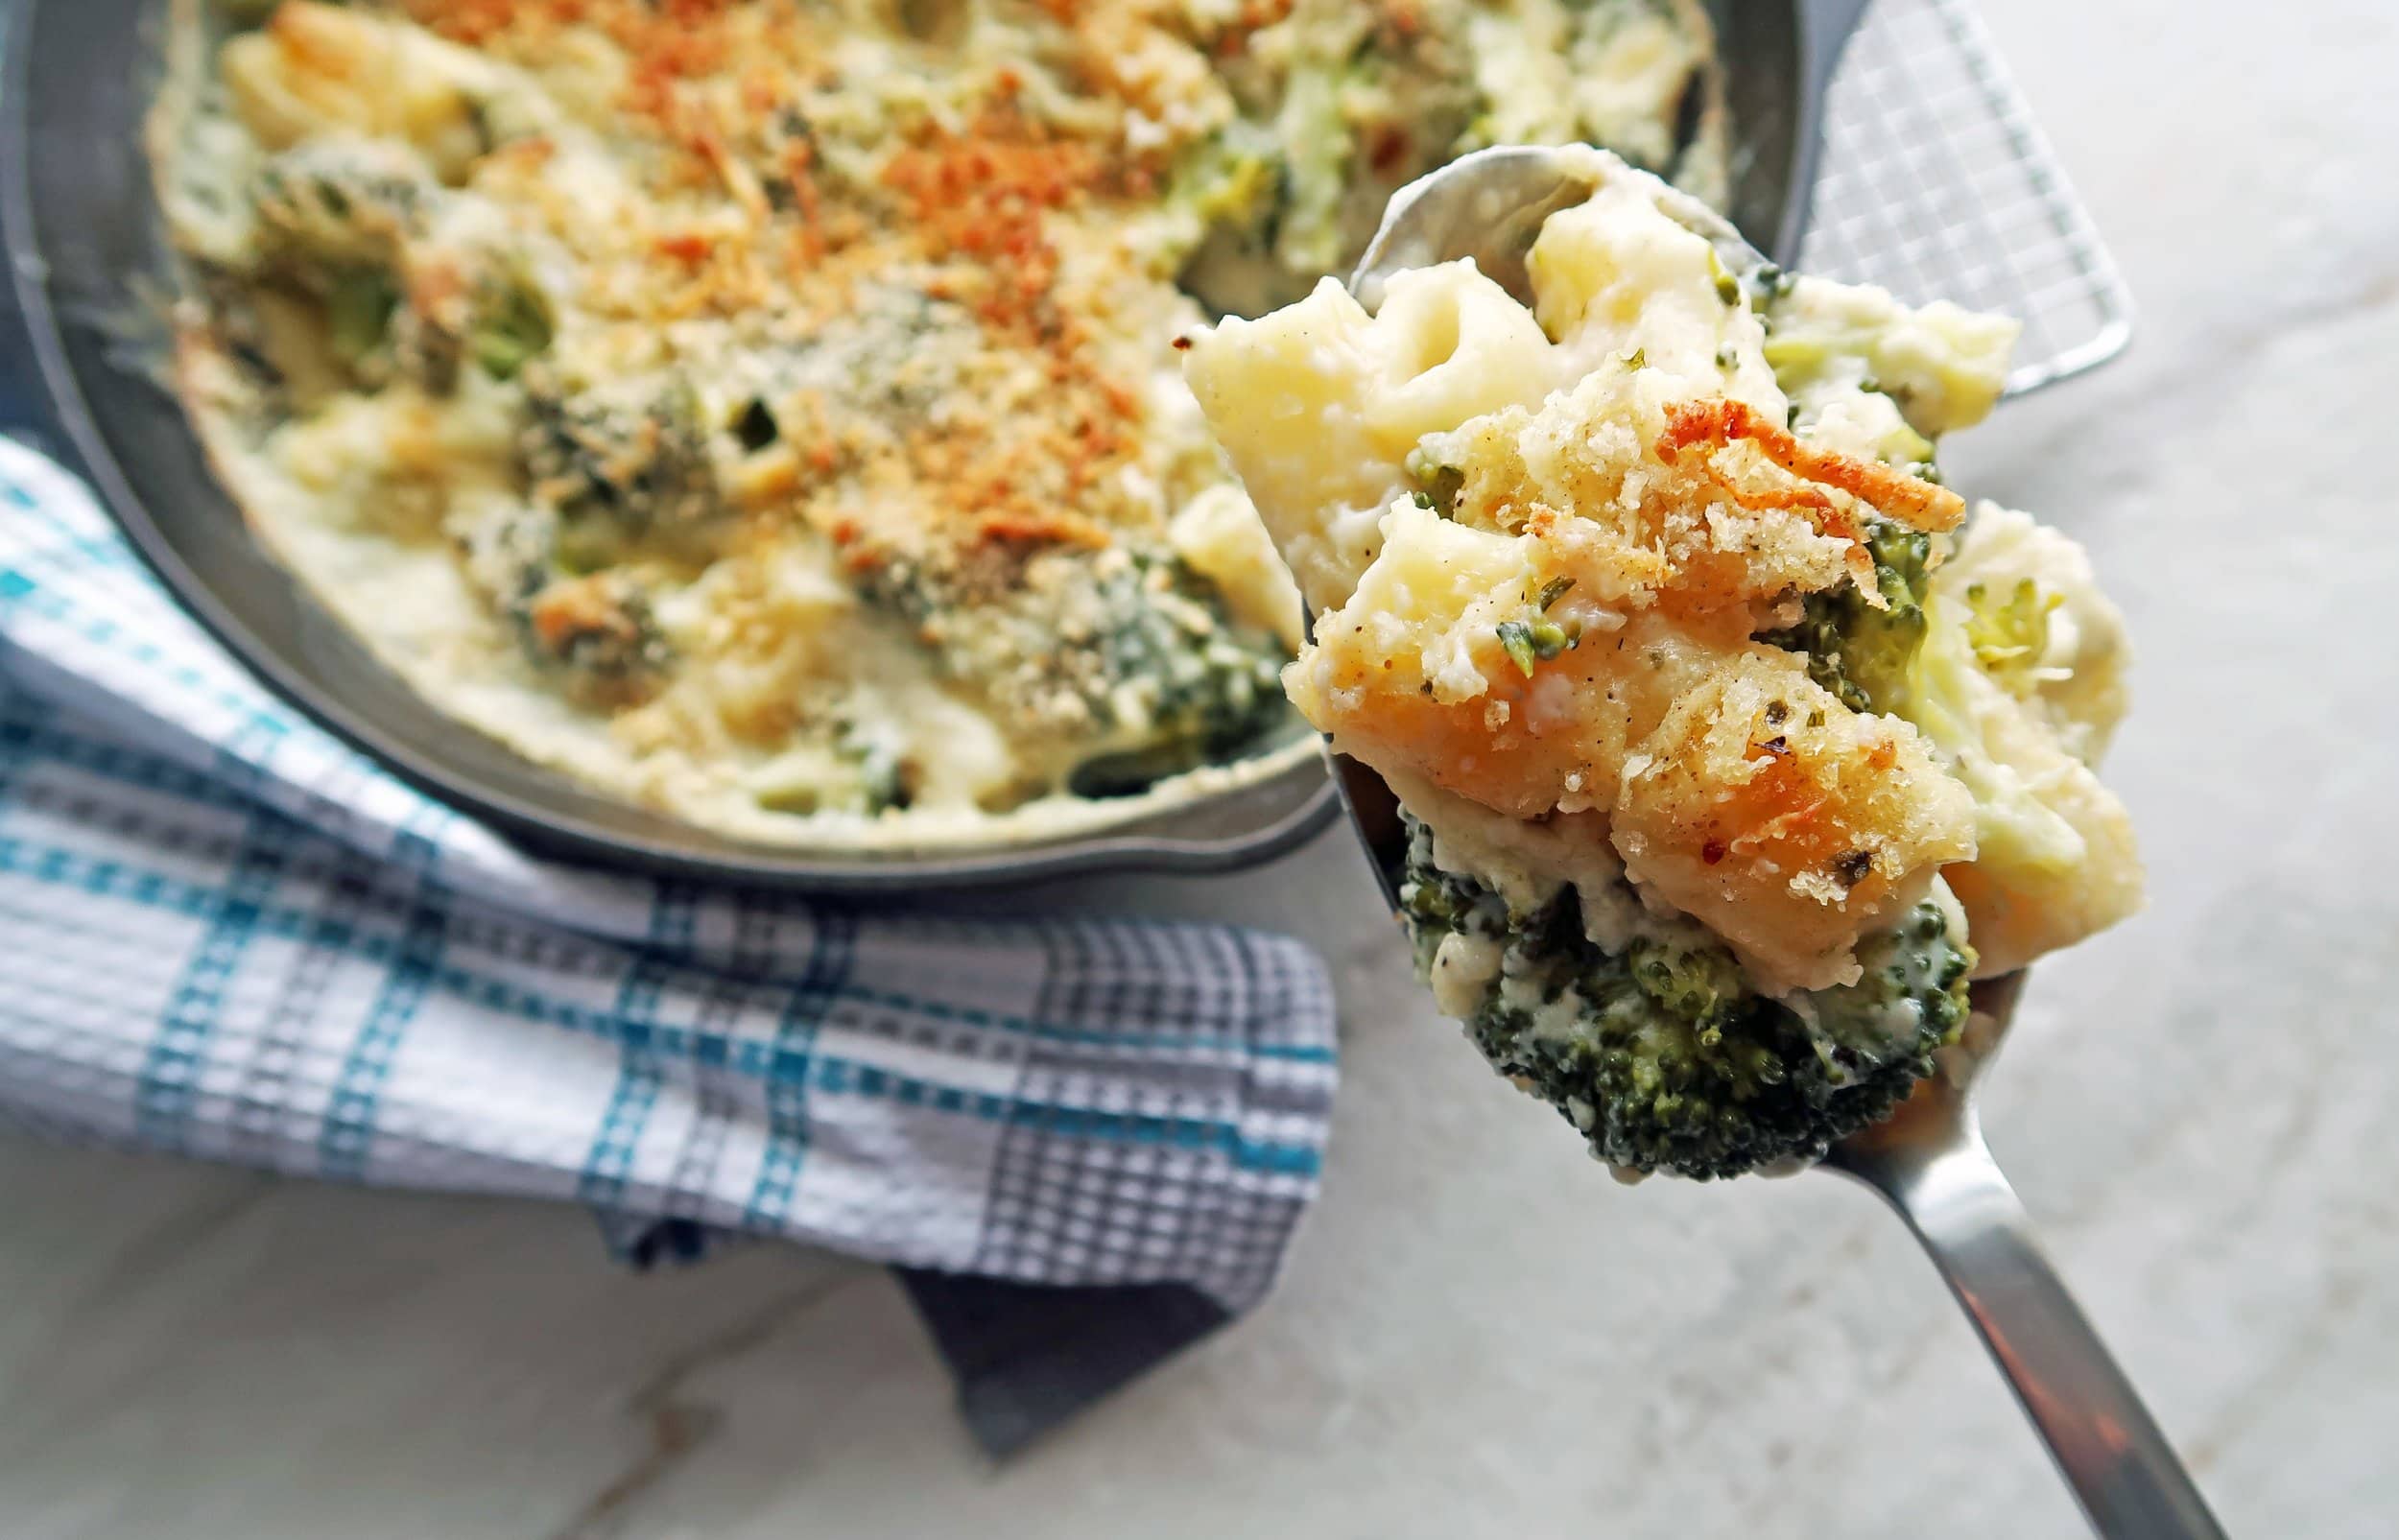 A spoon full of broccoli and white cheese sauce baked pasta.